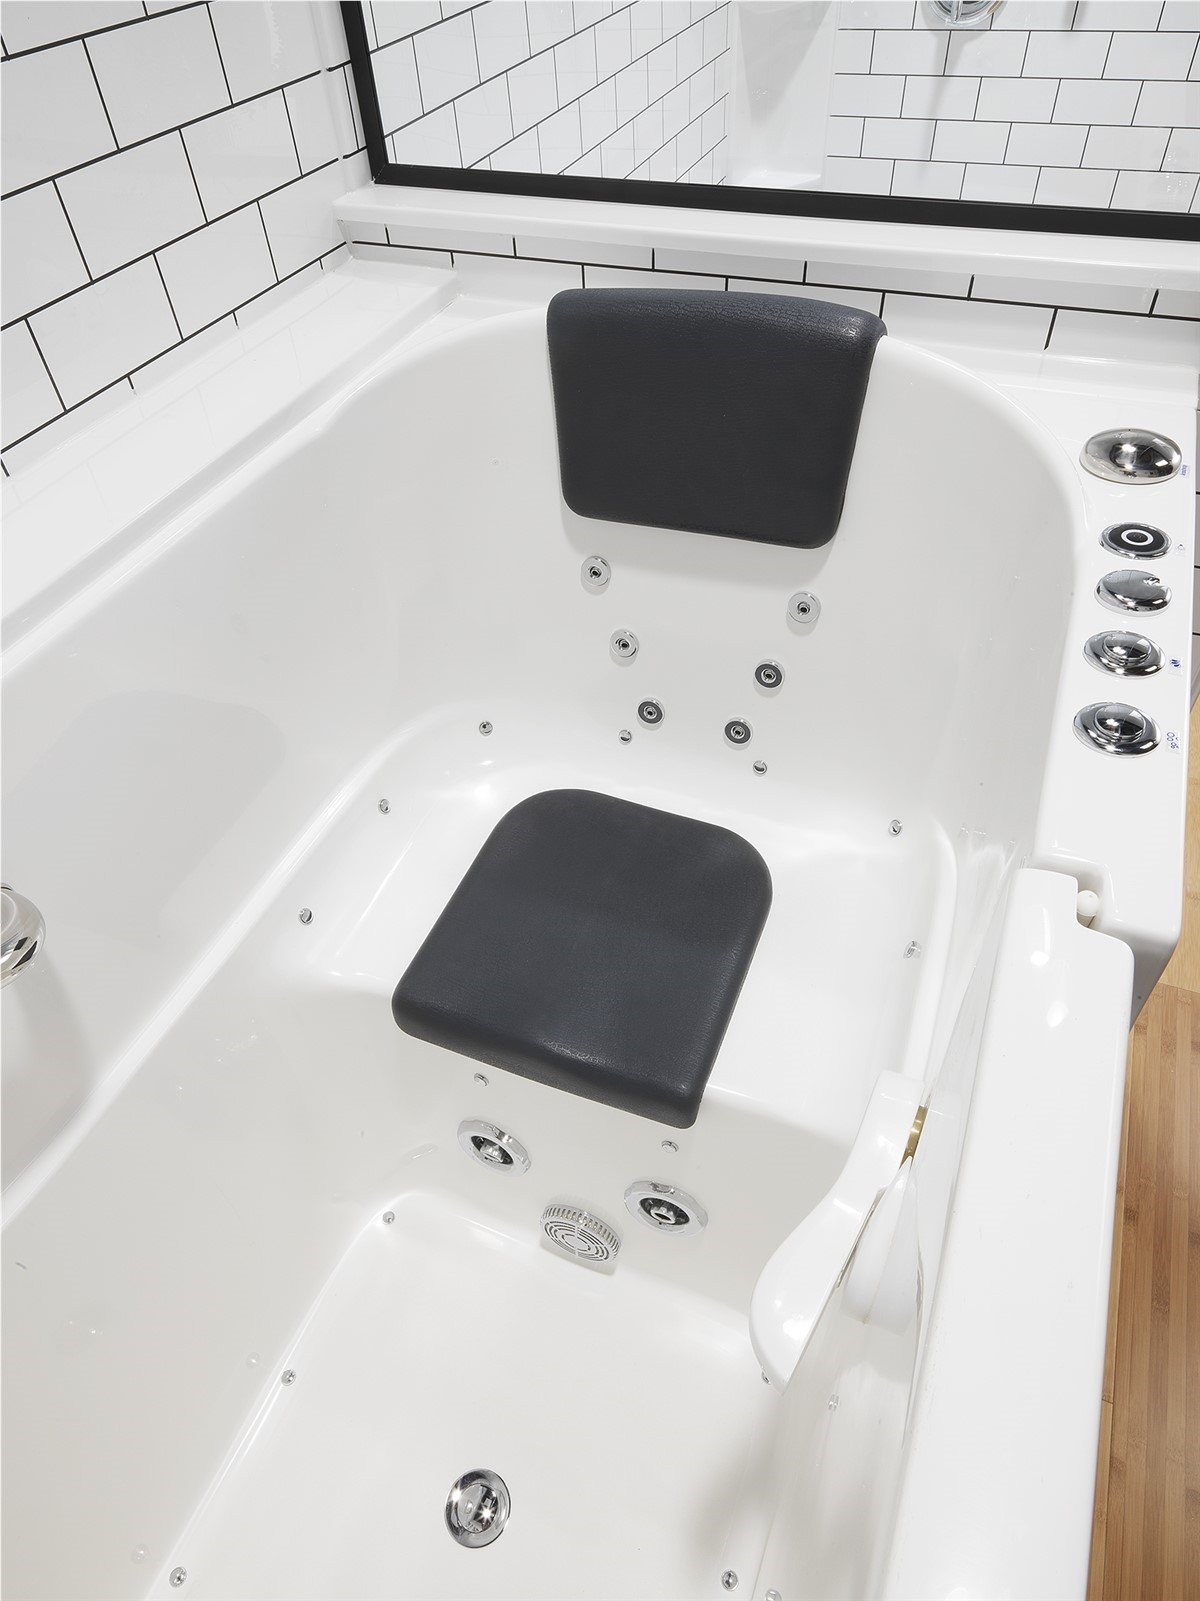 Choosing the Right Walk-In Tub for Your Needs and Lifestyle